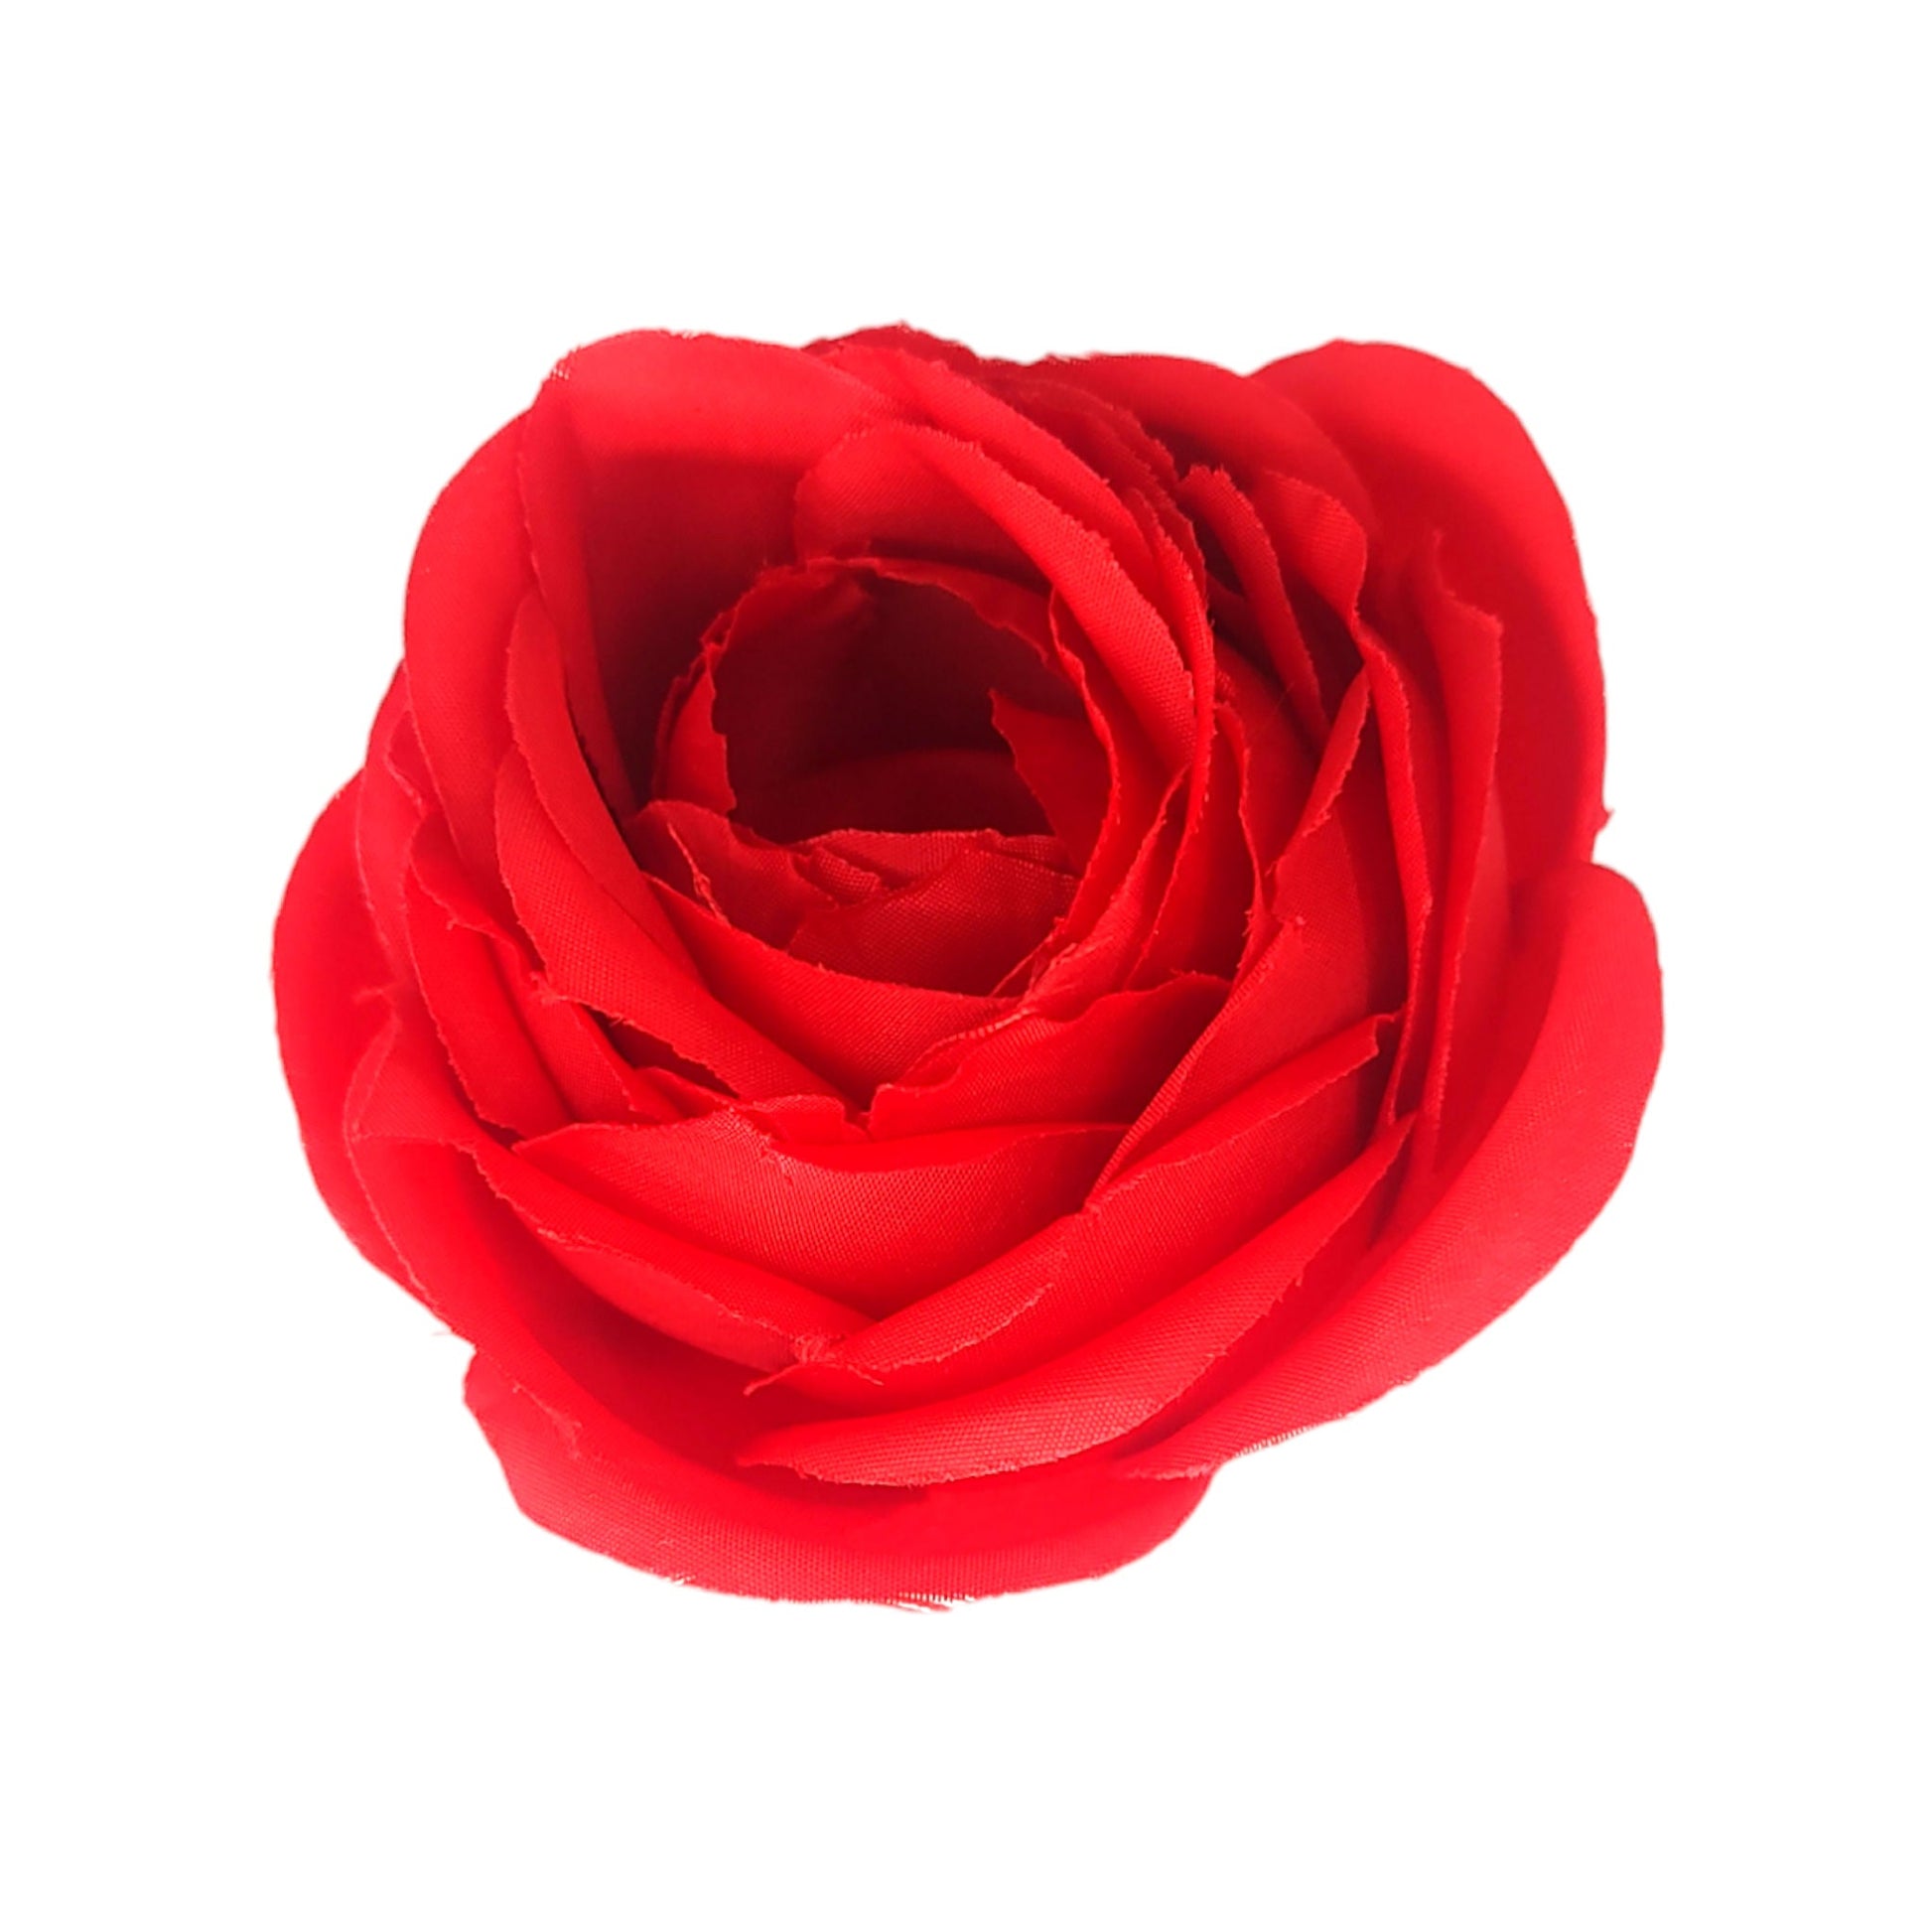 Indian Petals 6.5 cm Big Cabbage  Rose Fabric Flower Head For Crafting or Decoration - 20 Pcs, 